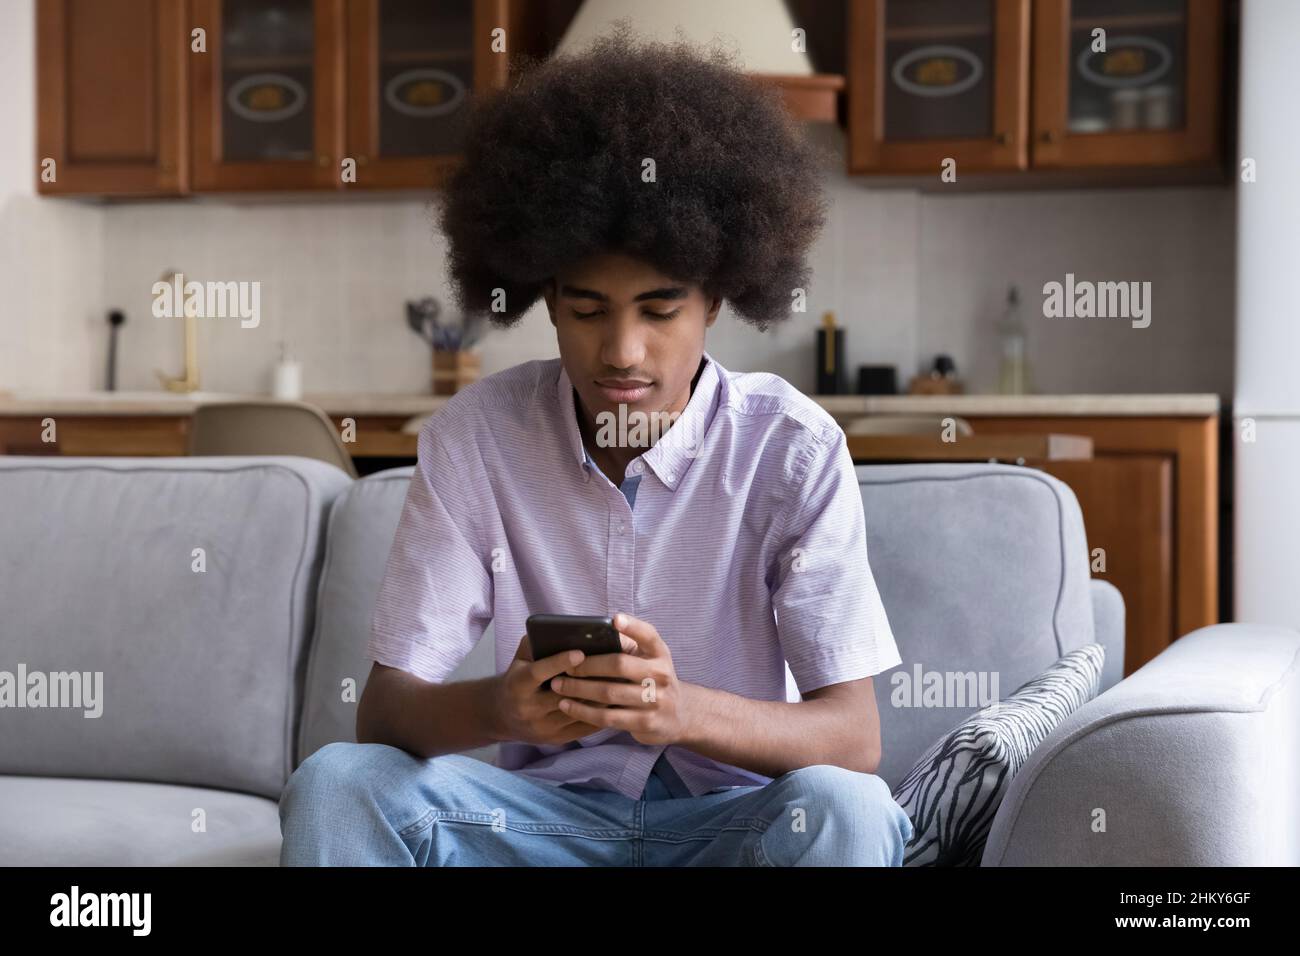 Serious teen African guy with Afro hairstyle typing message Stock Photo